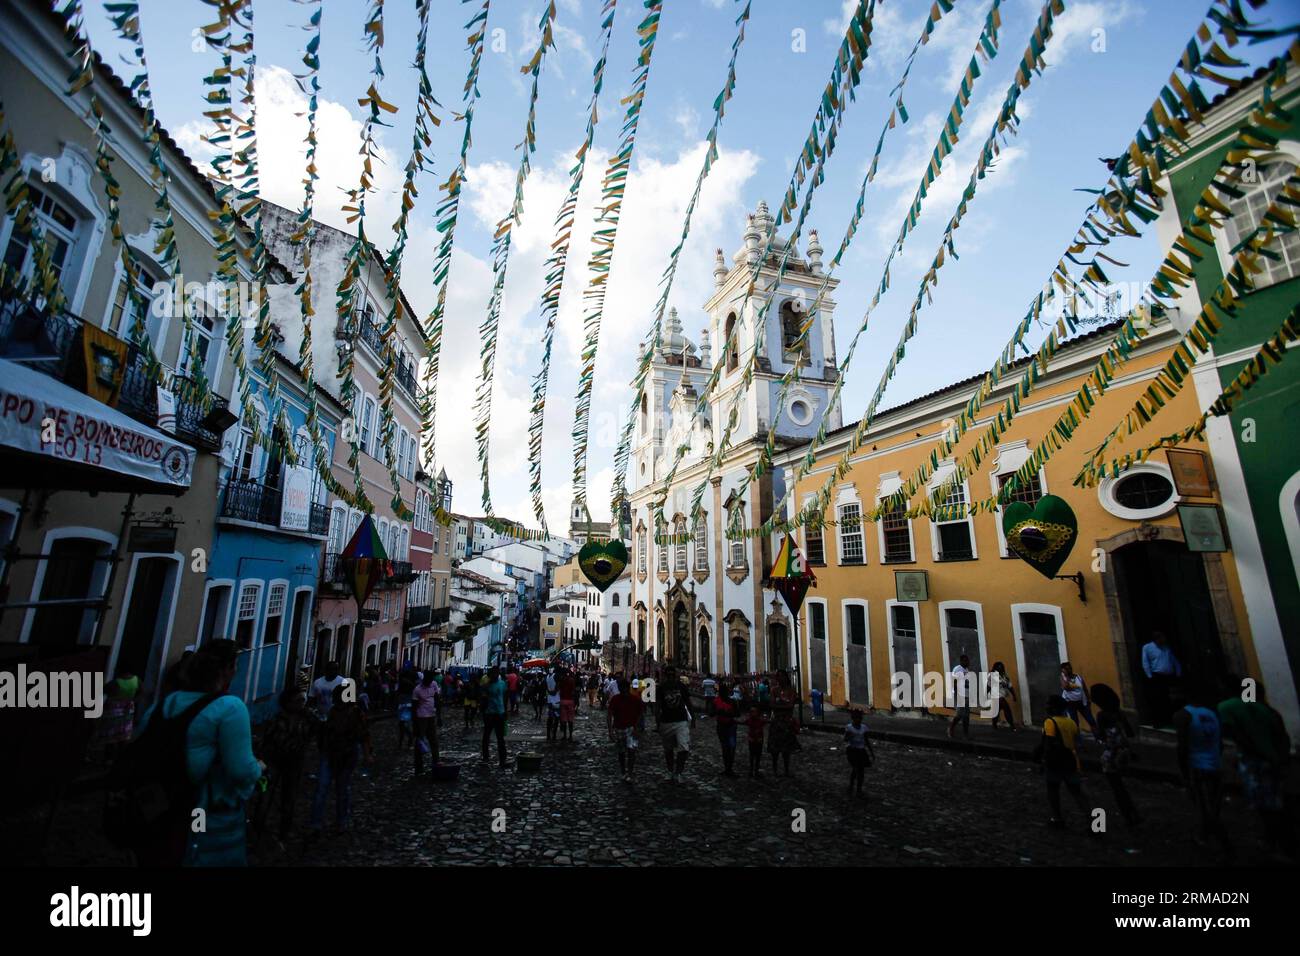 (140702) -- SALVADOR, July 2, 2014 (Xinhua) -- People walk in a street of the Historic Centre of Salvador, Brazil, on July 2, 2014. The Historic Centre of Salvador, requently called the Pelourinho, is extremely rich in historical monuments dating from the 17th through the 19th centuries, and it was named a world cultural center by UNESCO in 1985. (Xinhua/Jhon Paz) BRASIL-SALVADOR-WORD CUP 2014-TOURISM PUBLICATIONxNOTxINxCHN   Salvador July 2 2014 XINHUA Celebrities Walk in a Street of The Historic Centre of Salvador Brazil ON July 2 2014 The Historic Centre of Salvador  called The Pelourinho I Stock Photo